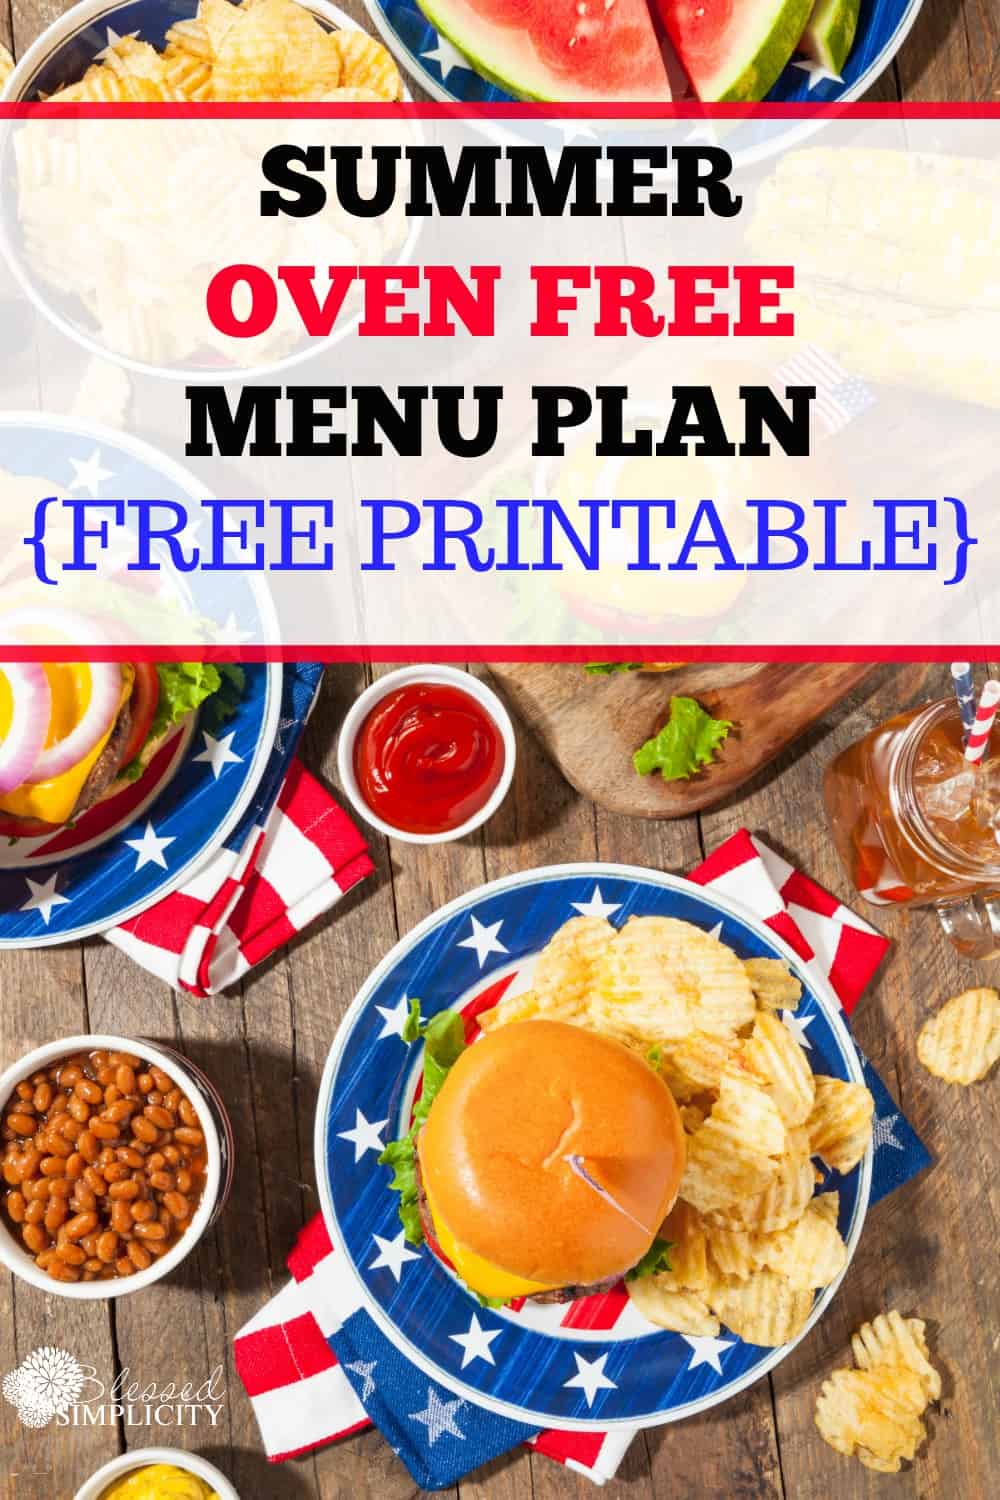 This summer time oven free menu plan is great! 31 days of oven free summer meals. | crock pot meals | crock pot recipes | oven free menu plan | oven free meals | grill recipes | slow cooker recipes | slow cooker meals | summer menu plan | oven free dinner recipe | oven free summer meals | oven free summer recipes | oven free dinners 